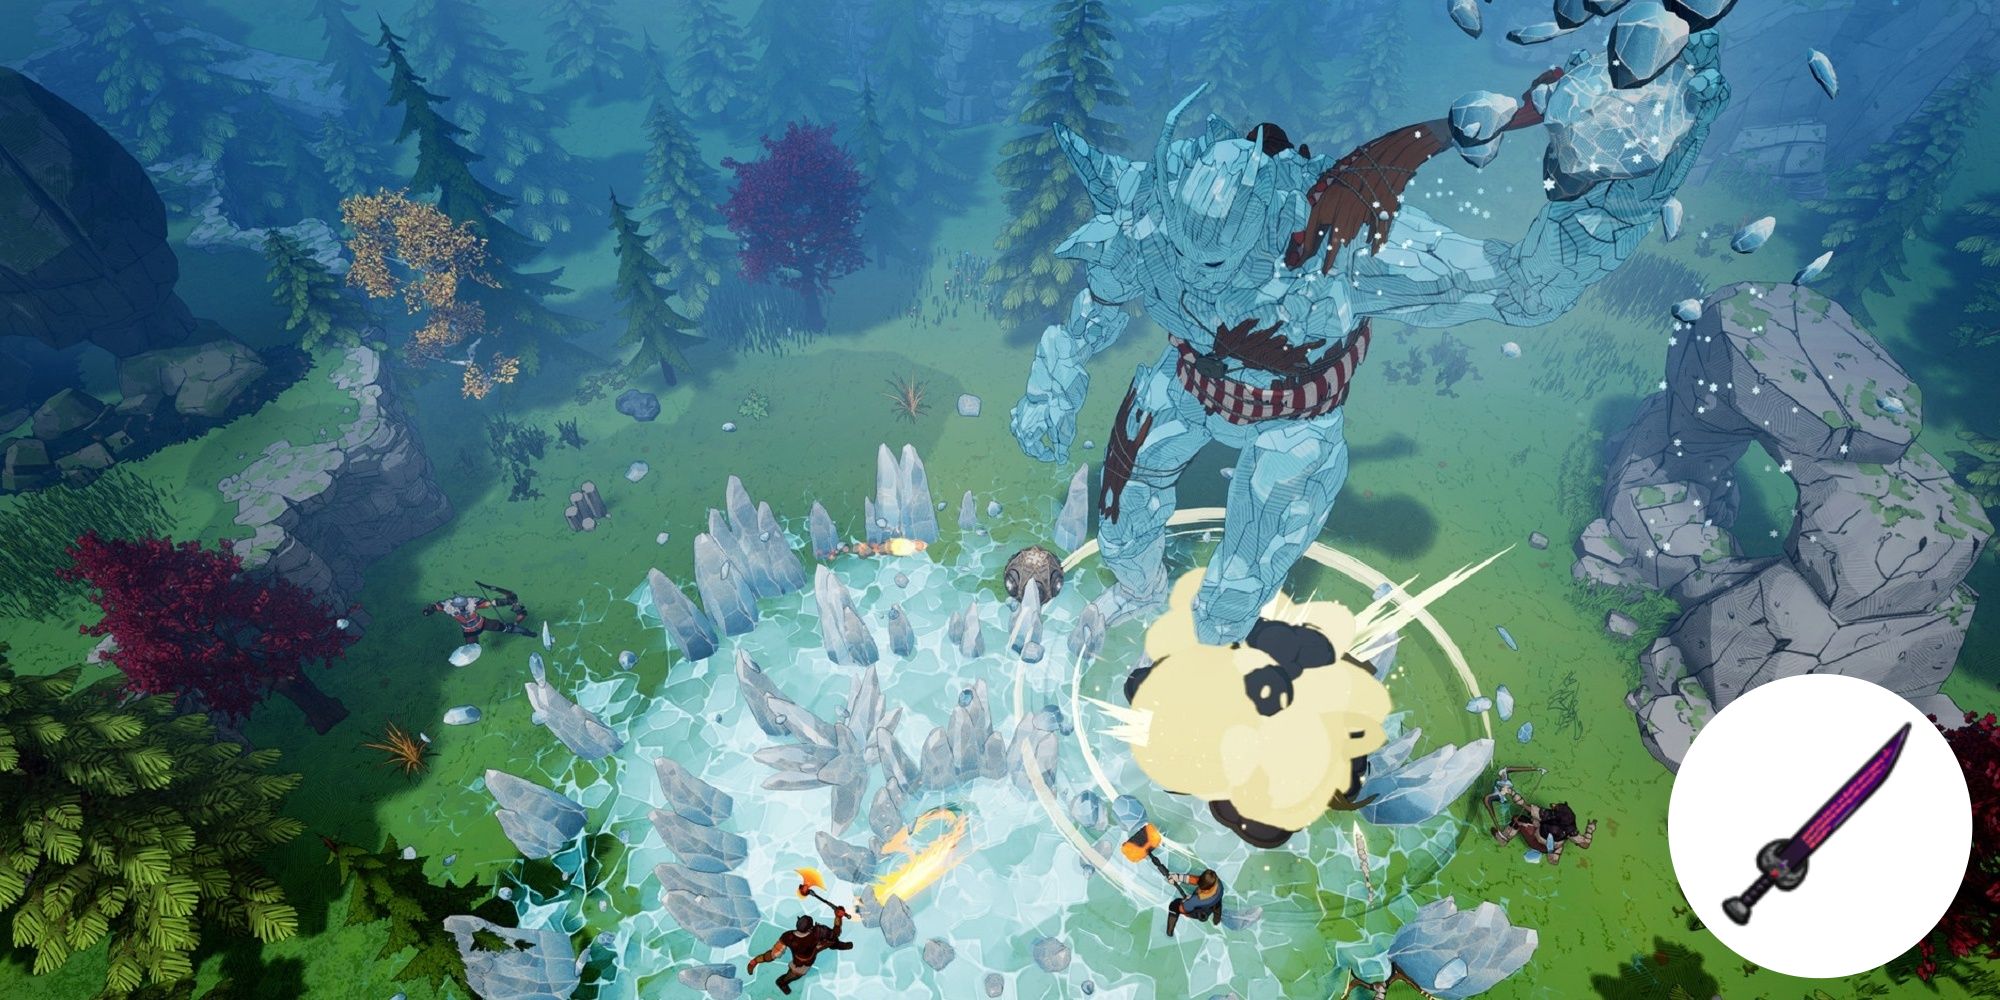 A screenshot of Tribes of Midgard featuring players fighting an ice giant in a lush green valley